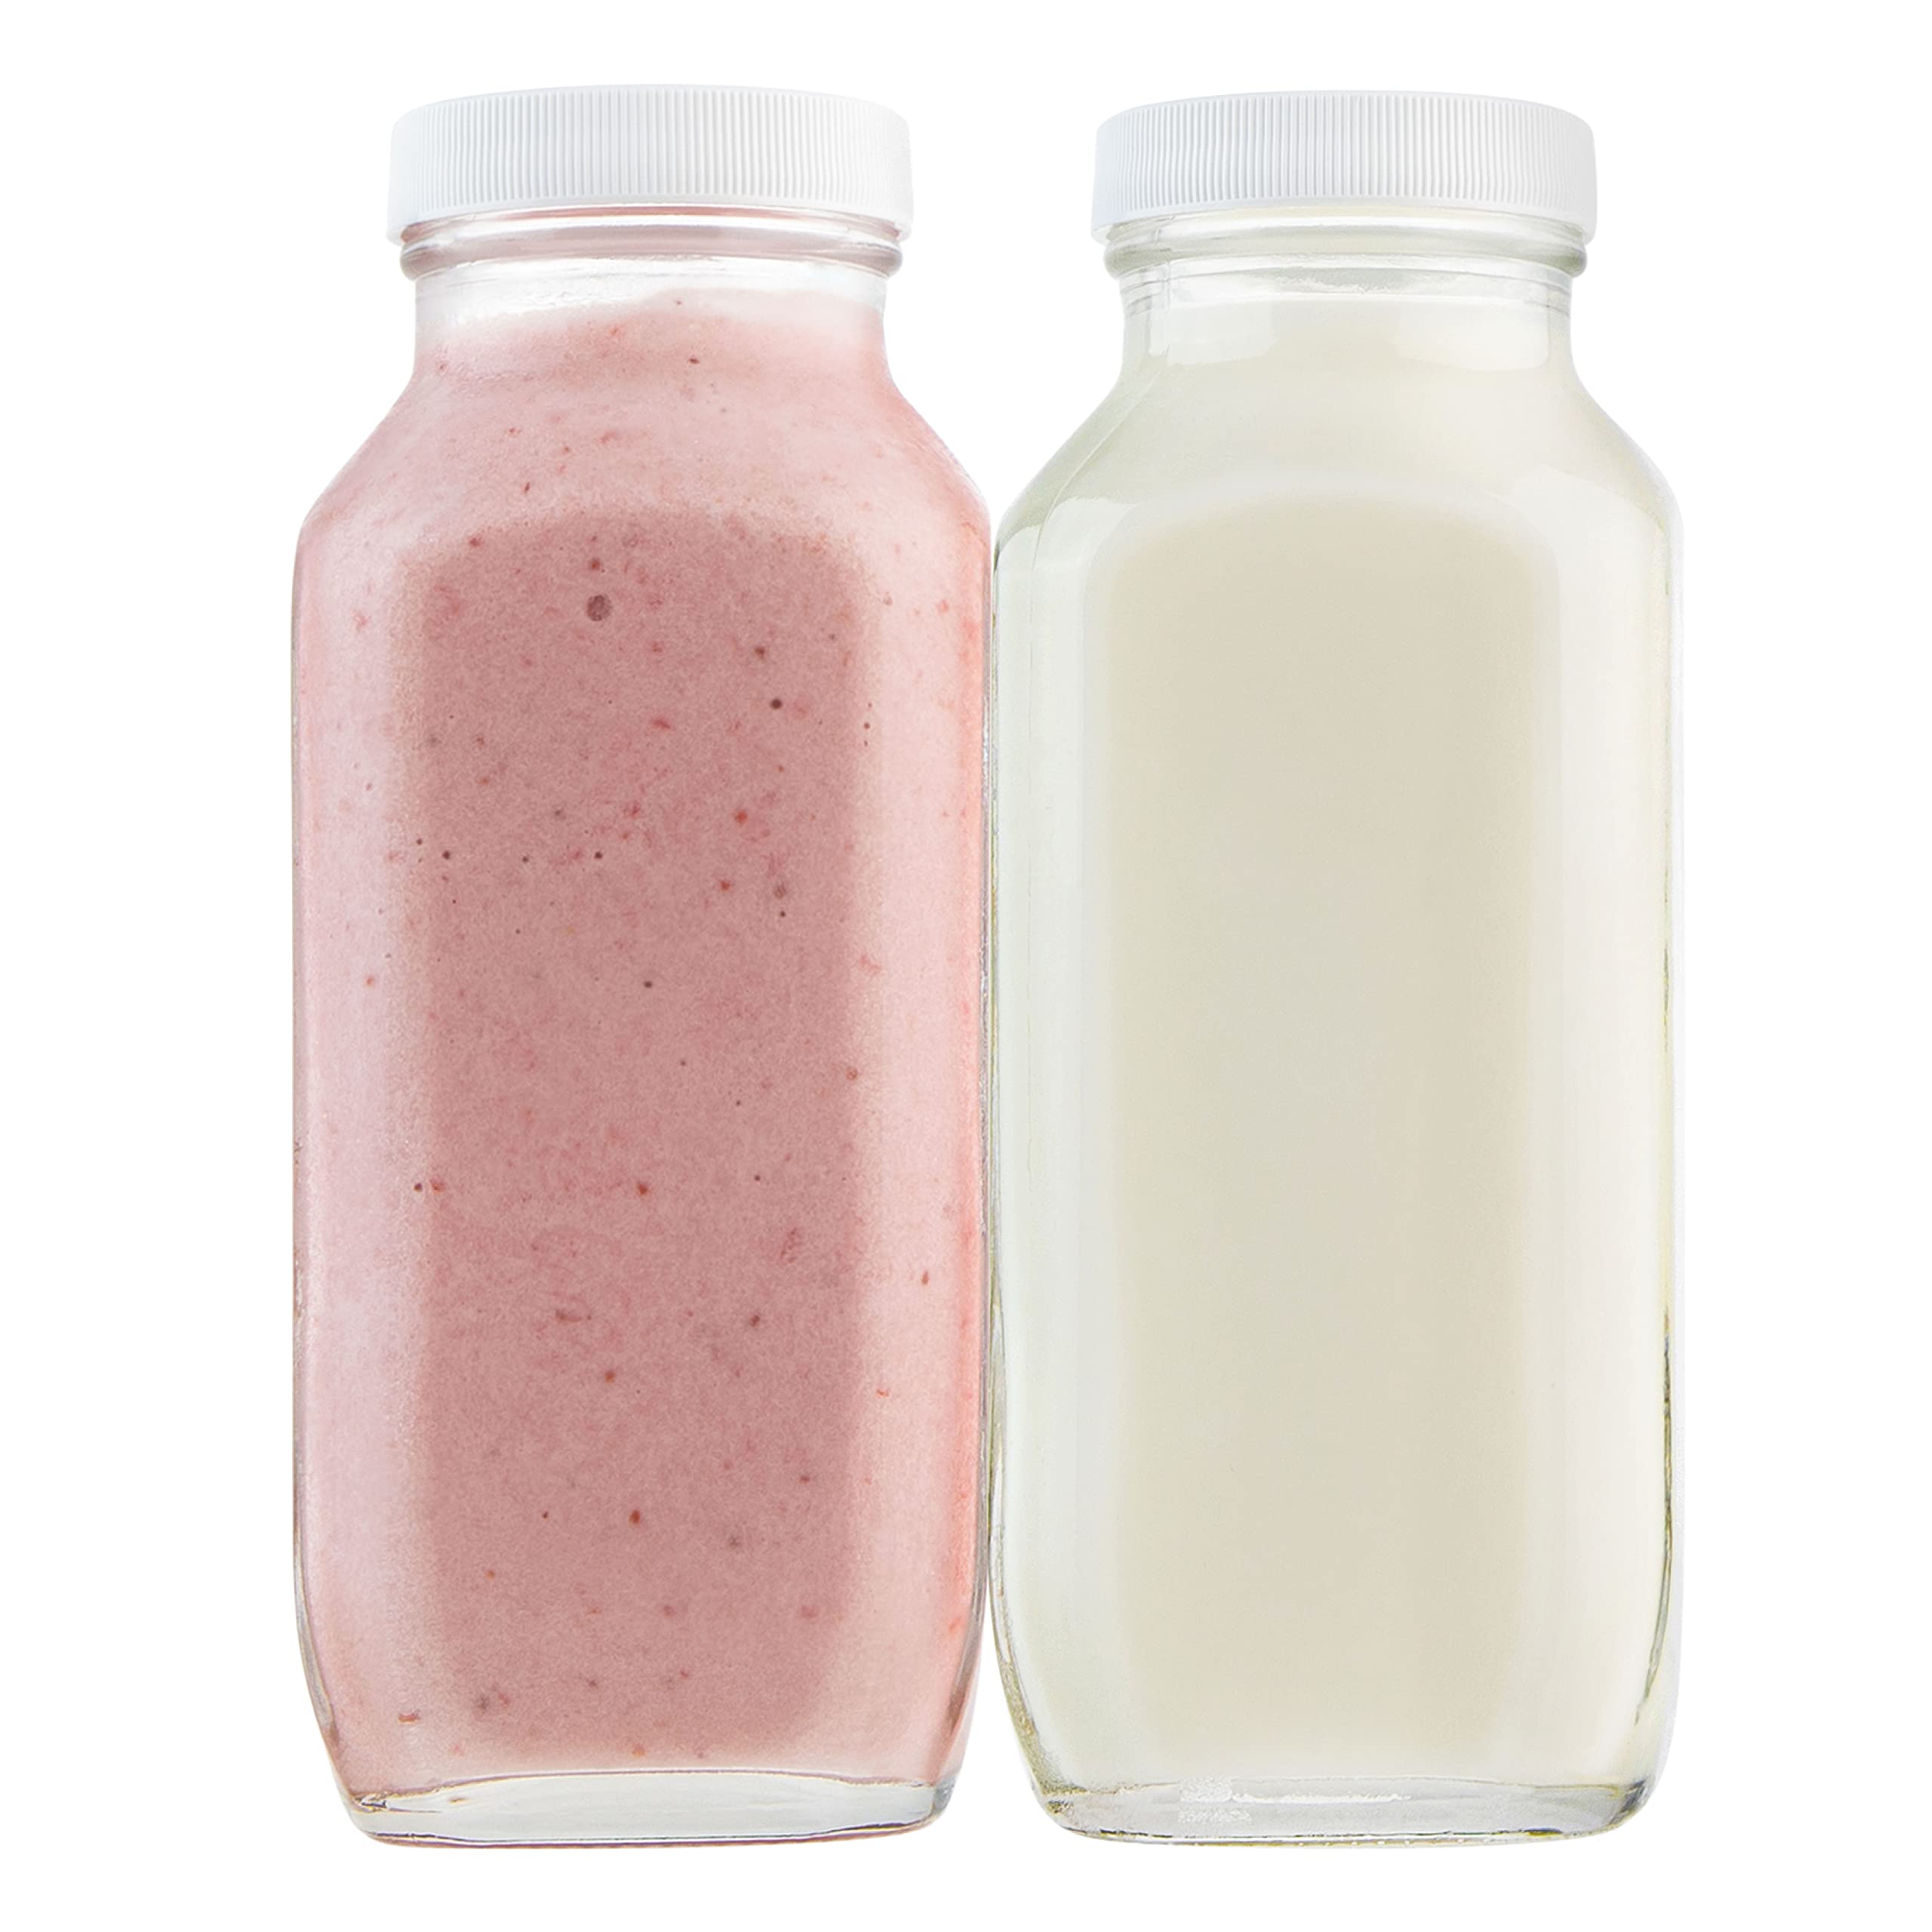 kitchentoolz 16oz Square Glass Milk Bottle with Plastic Airtight Lids - Vintage Reusable Dairy Drinking Jars Containers for Milk, Yogurt, Smoothies, Kefir, Kombucha, and Water- Pack of 2  - Very Good